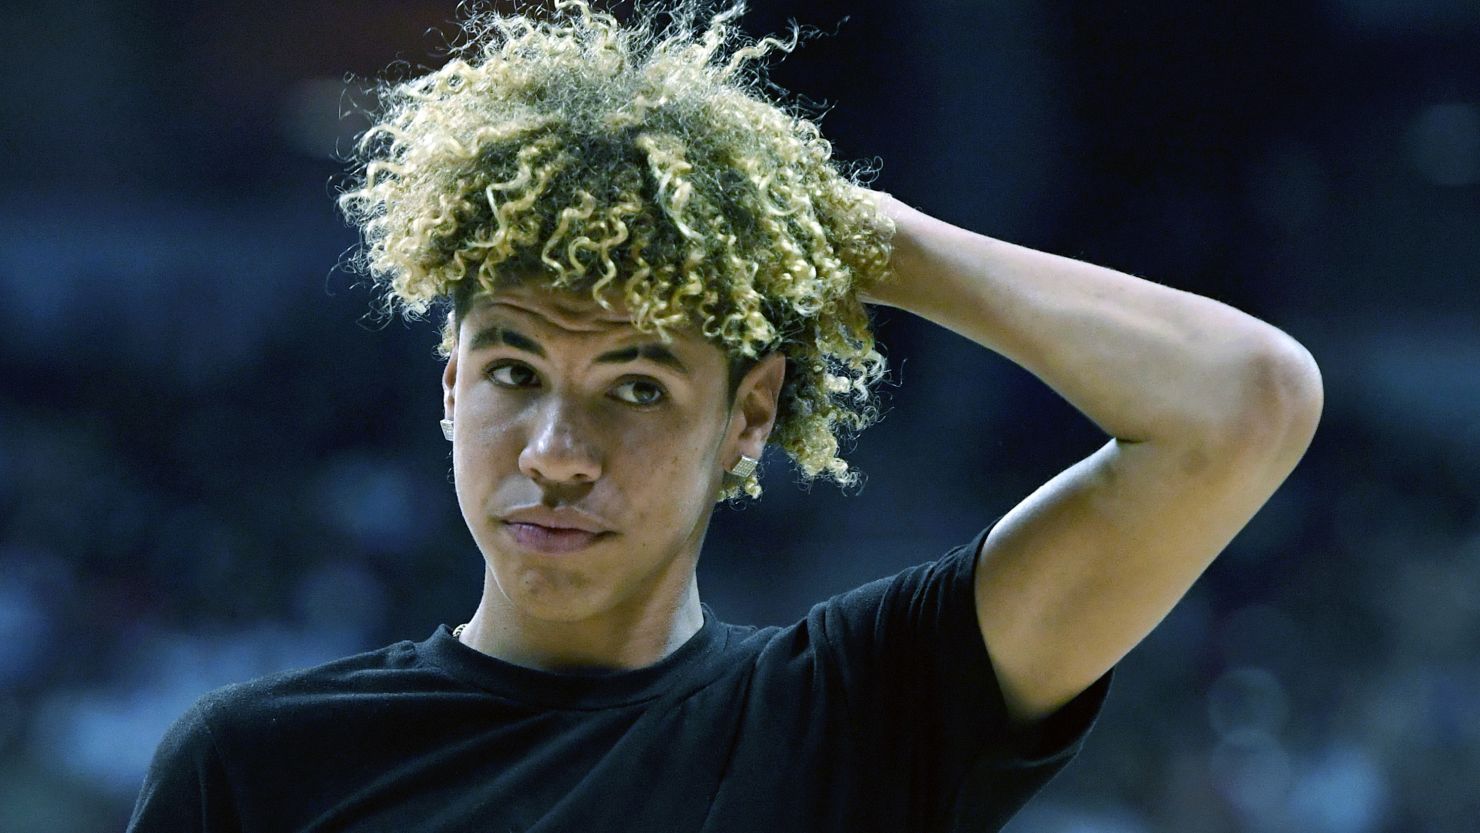 LaMelo Ball Faces Backlash For Laughing On Bench During Blowout Loss